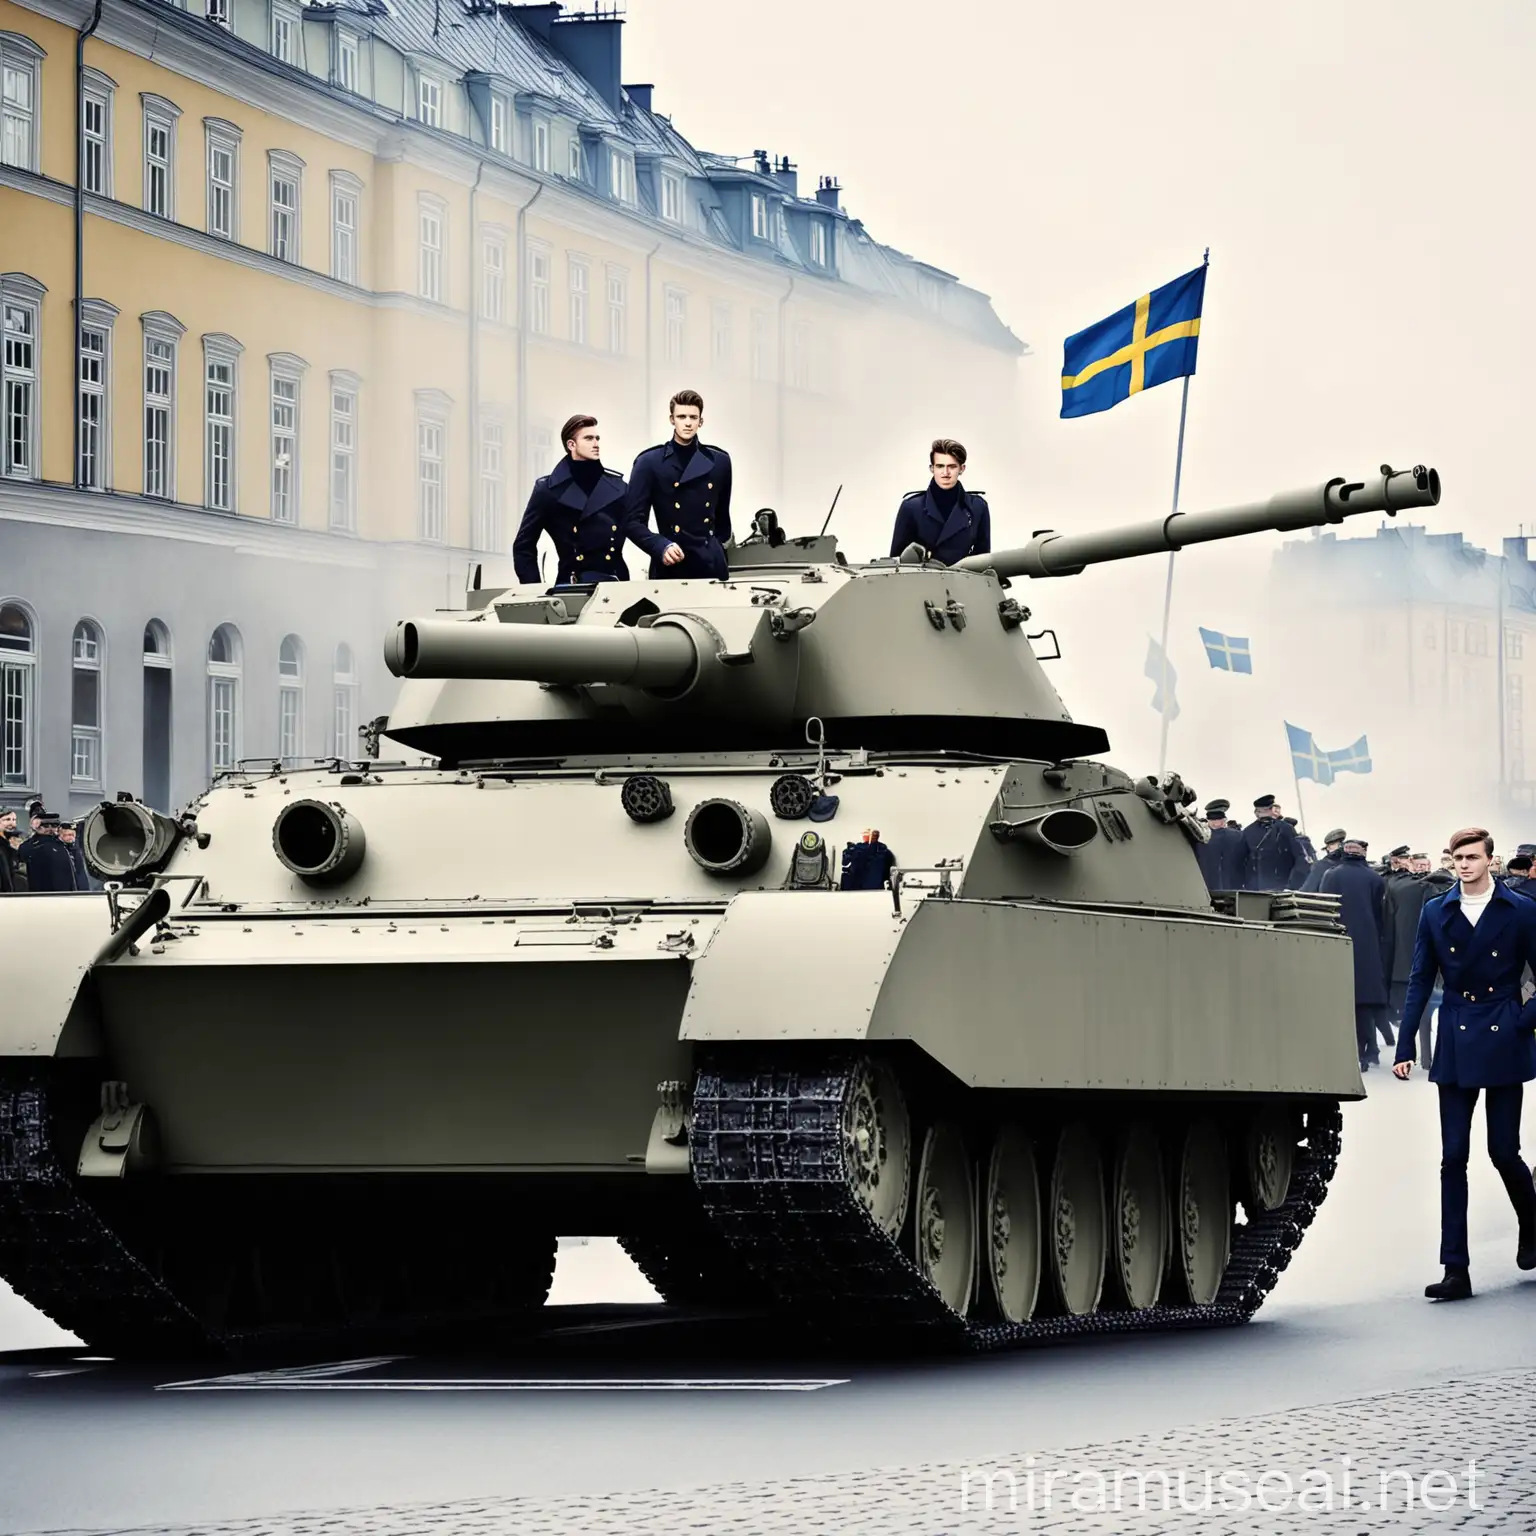 Swedish Flag Tanks Led by Handsome Man in Navy Trench Coat